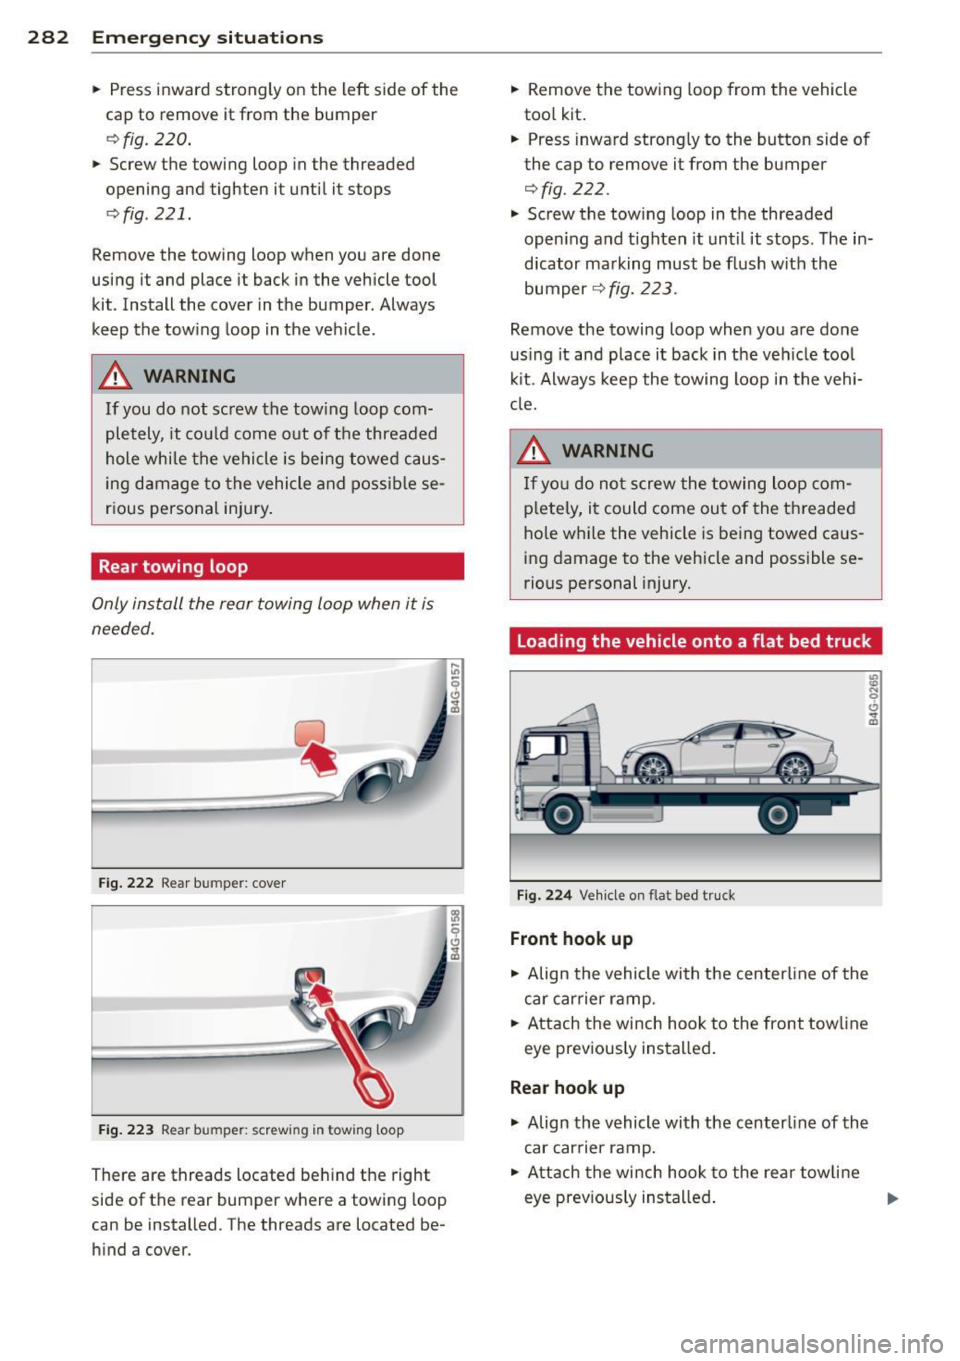 AUDI S7 2013  Owners Manual 282  Emergency situations 
• Press  inward  strongly  on  the  left  side  of  the 
cap  to  remove  it  from  the  bumper 
¢ fig . 220 . 
• Screw  the  towing  loop  in the  threaded 
opening  a